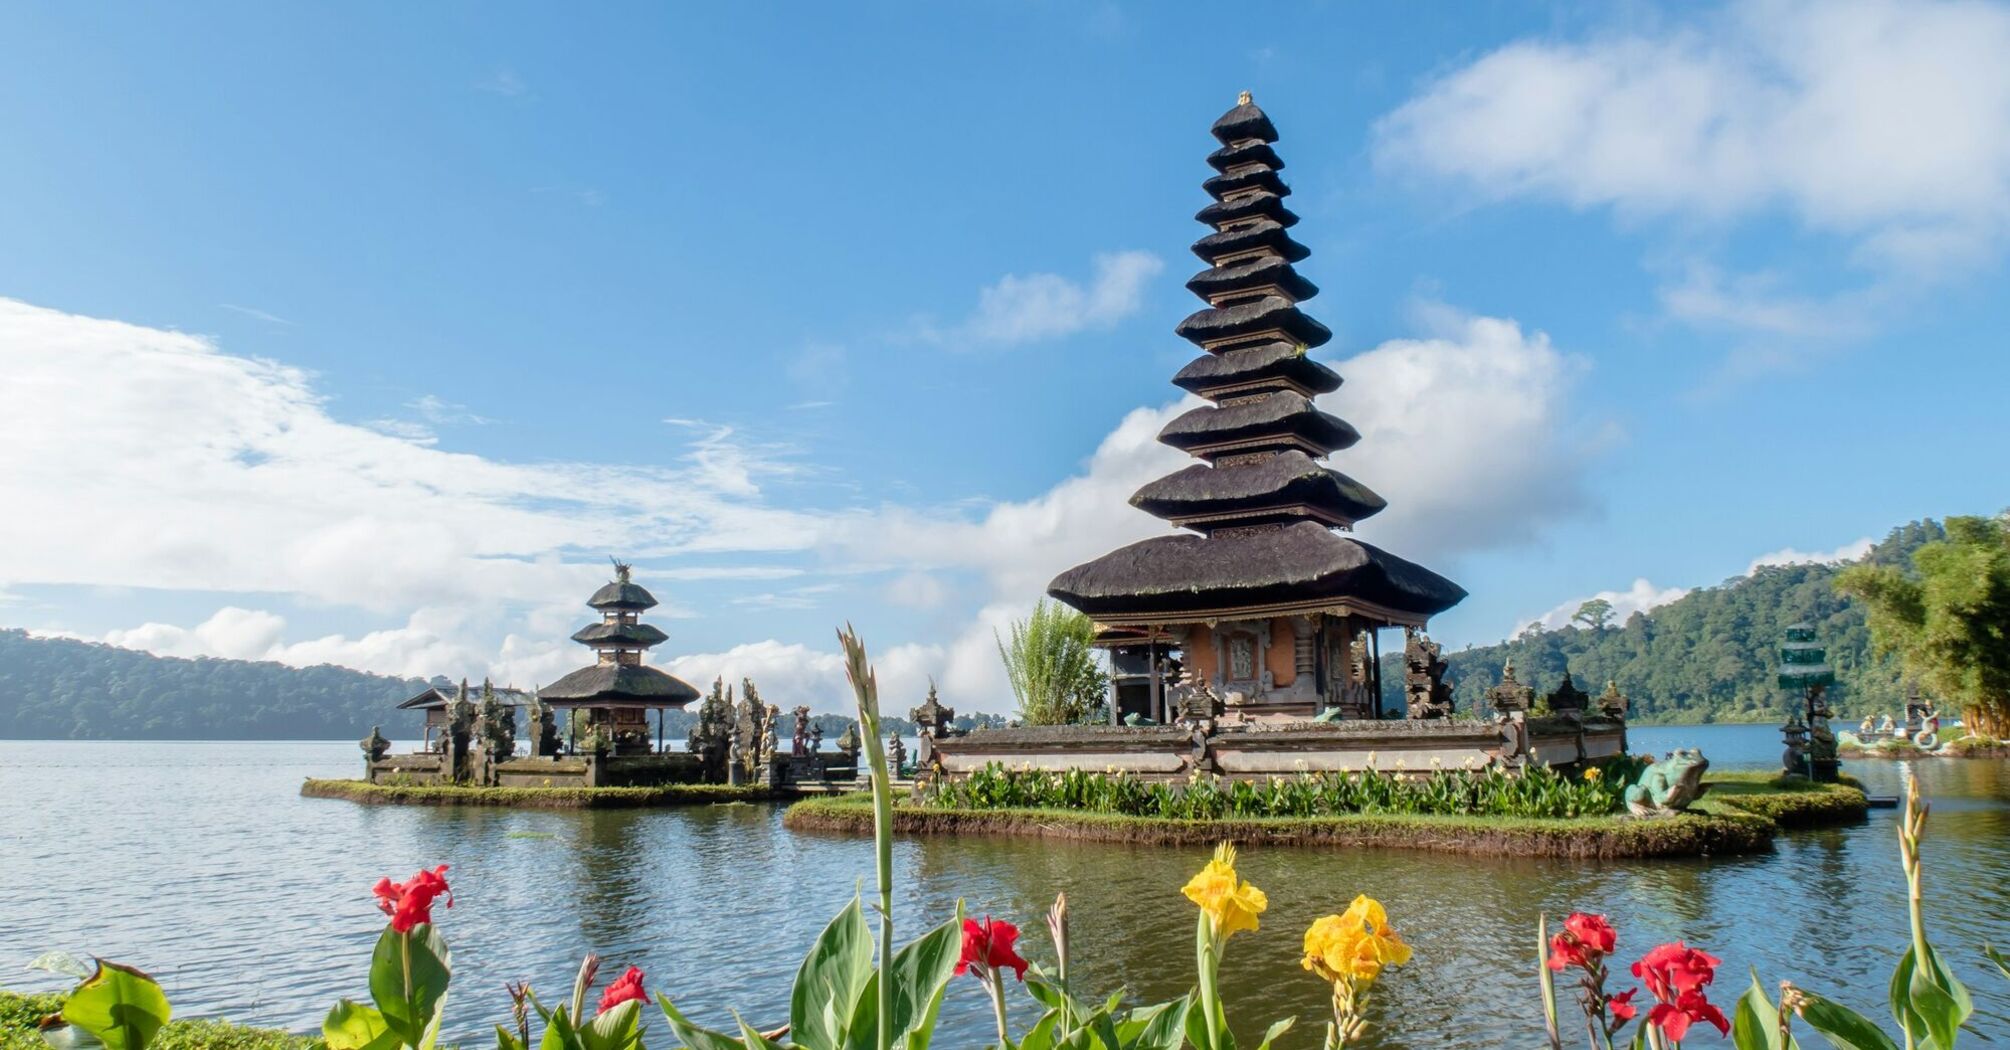 A serene view of Pura Ulun Danu Bratan, a Hindu temple on Bratan Lake in Bali, with multi-tiered shrines, surrounded by lush greenery and blooming flowers 